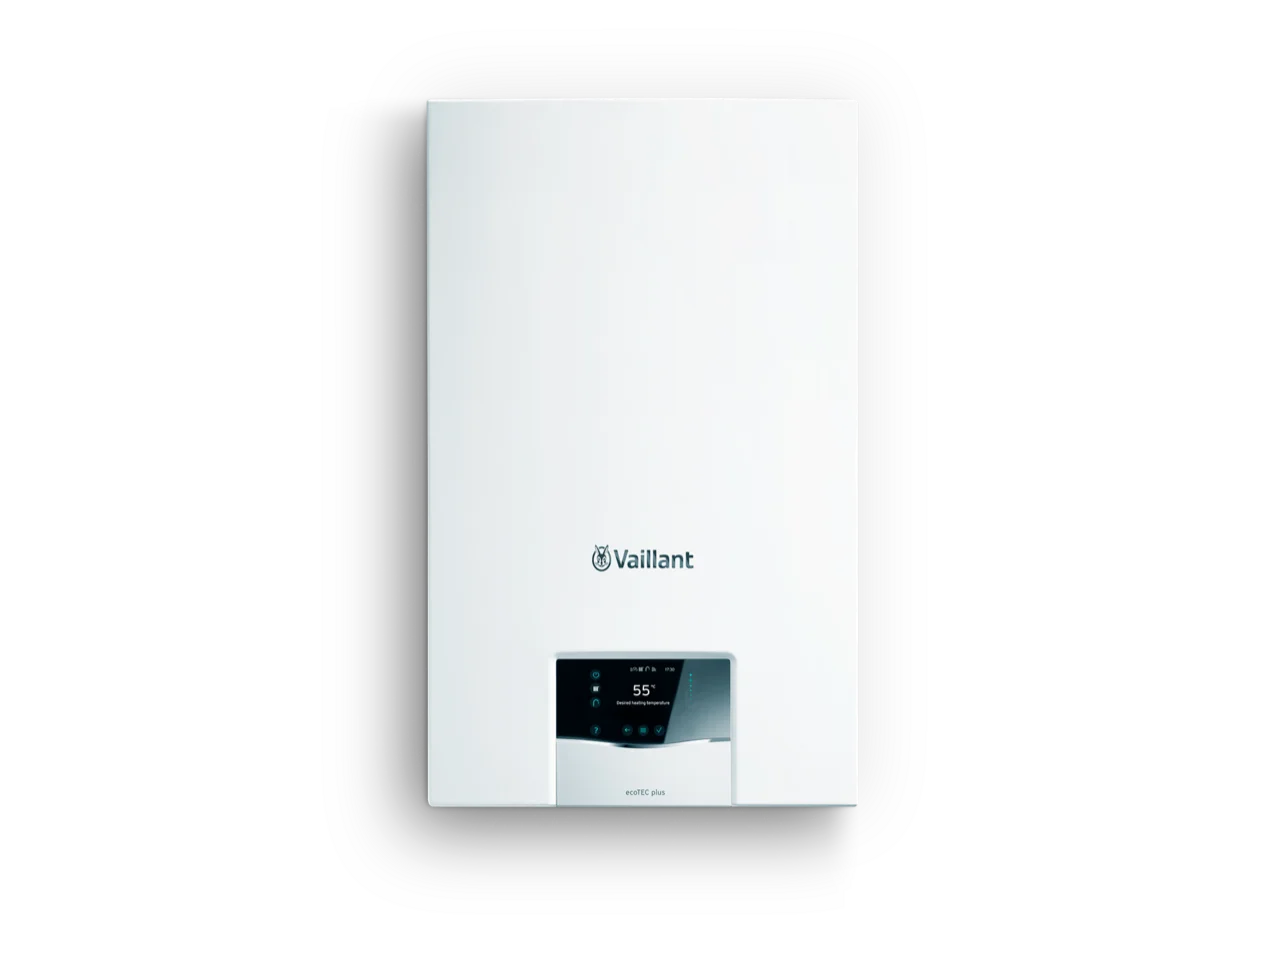 The boiler blog, Discover the Latest Trends in the Heating Industry